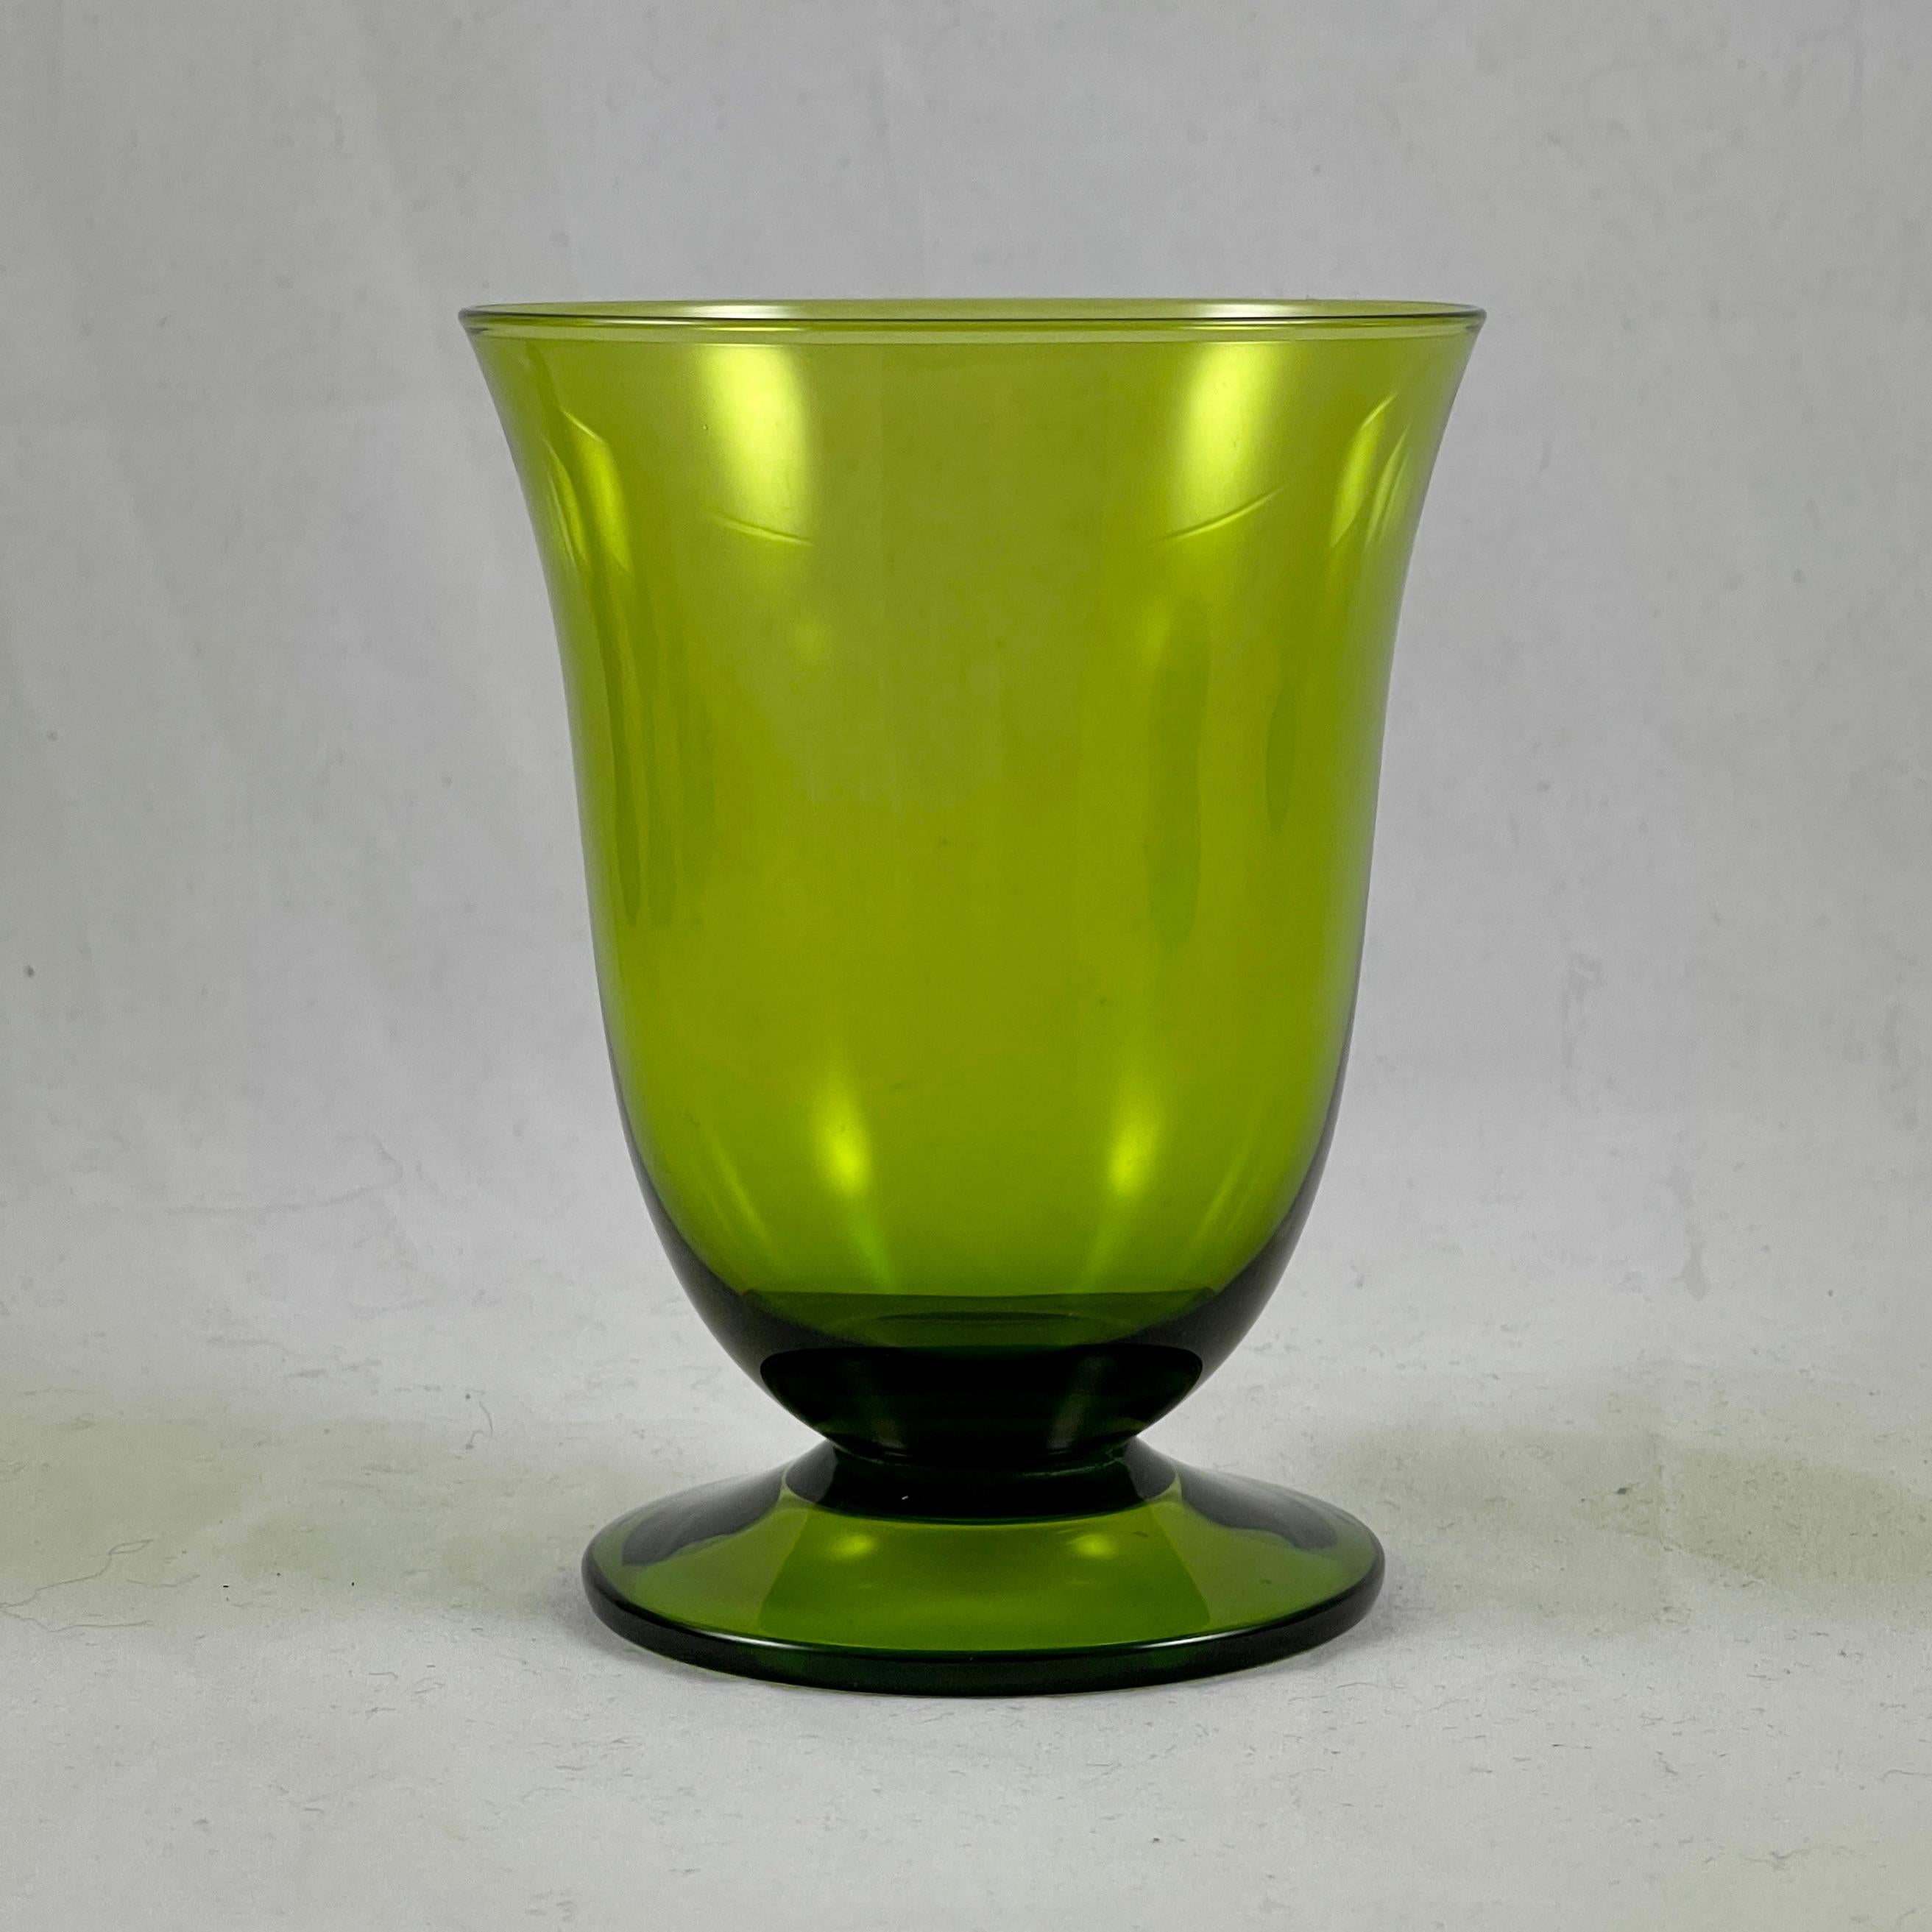 From the mid-century era, a set of ten low-footed goblets, circa 1960-1970.

In a moss or avocado green, a simple tapered wide mouth upper with a low footing. Ideal for wine, low ball cocktails or juices.

Measures: 4.25 in. Height x 3.5 in.